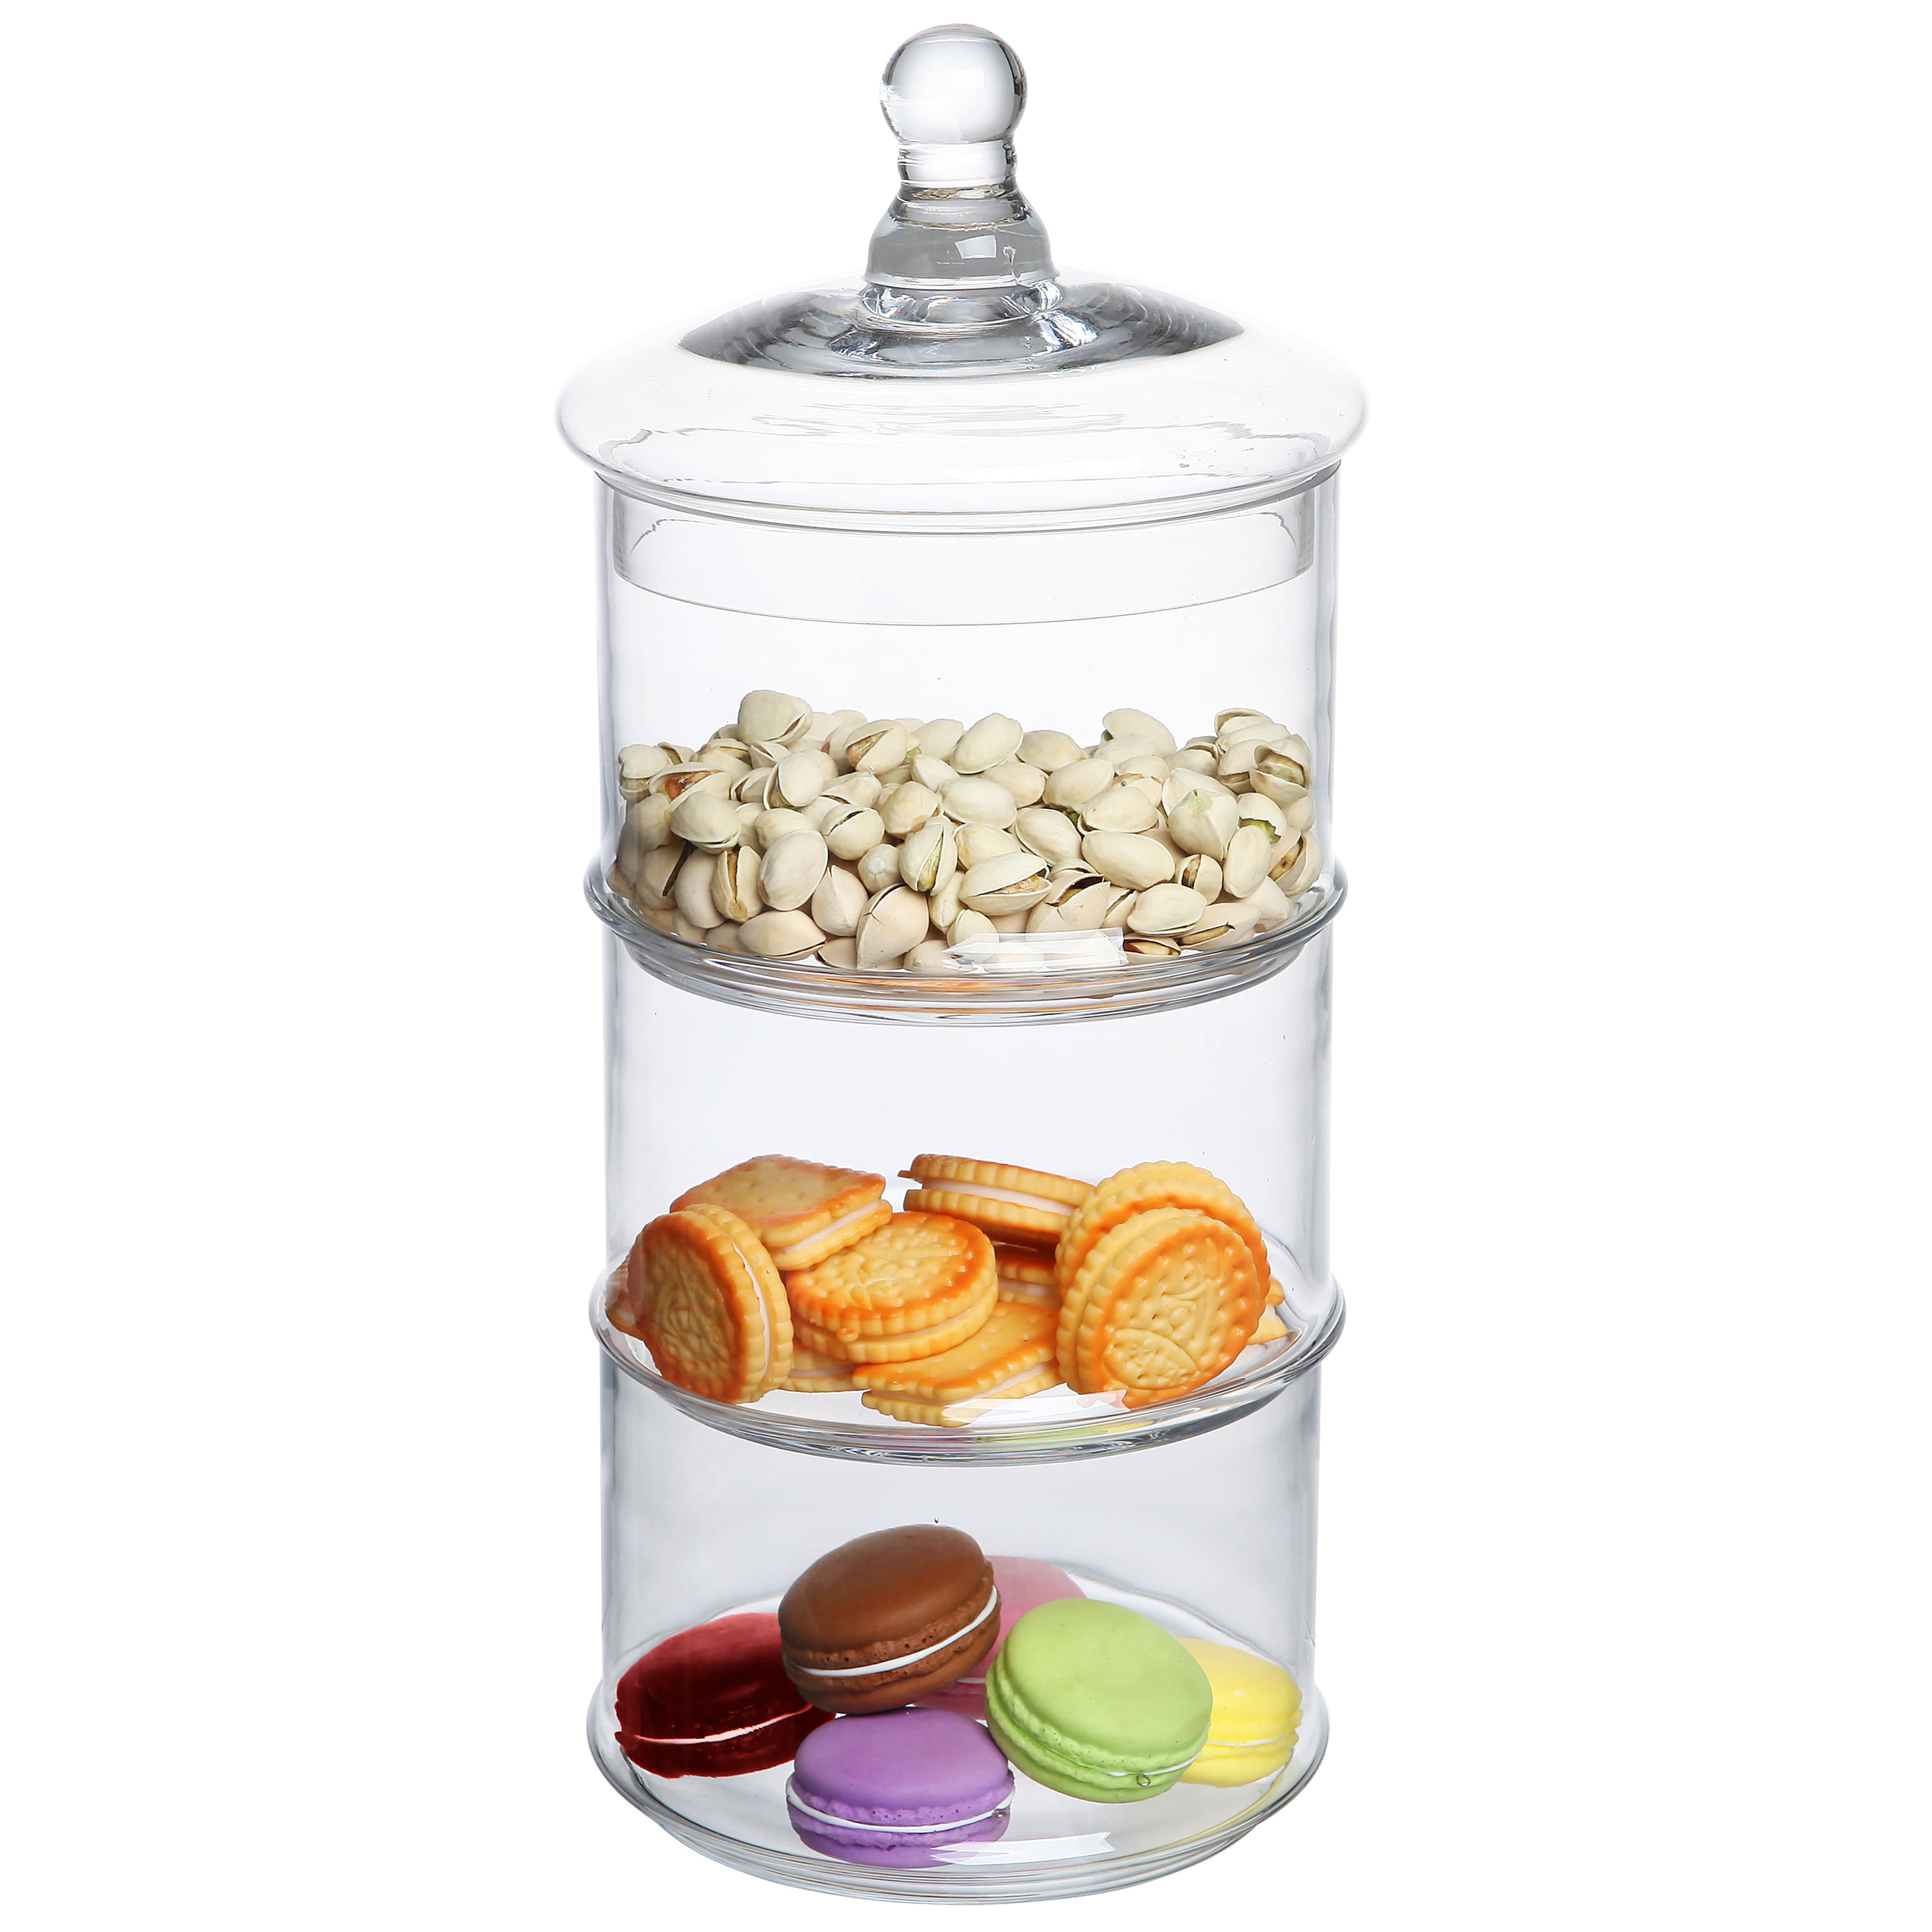 Clear Glass Lidded Cookie/Storage Jar for Kitchen  Glass apothecary jars,  Apothecary jars, Bon bons